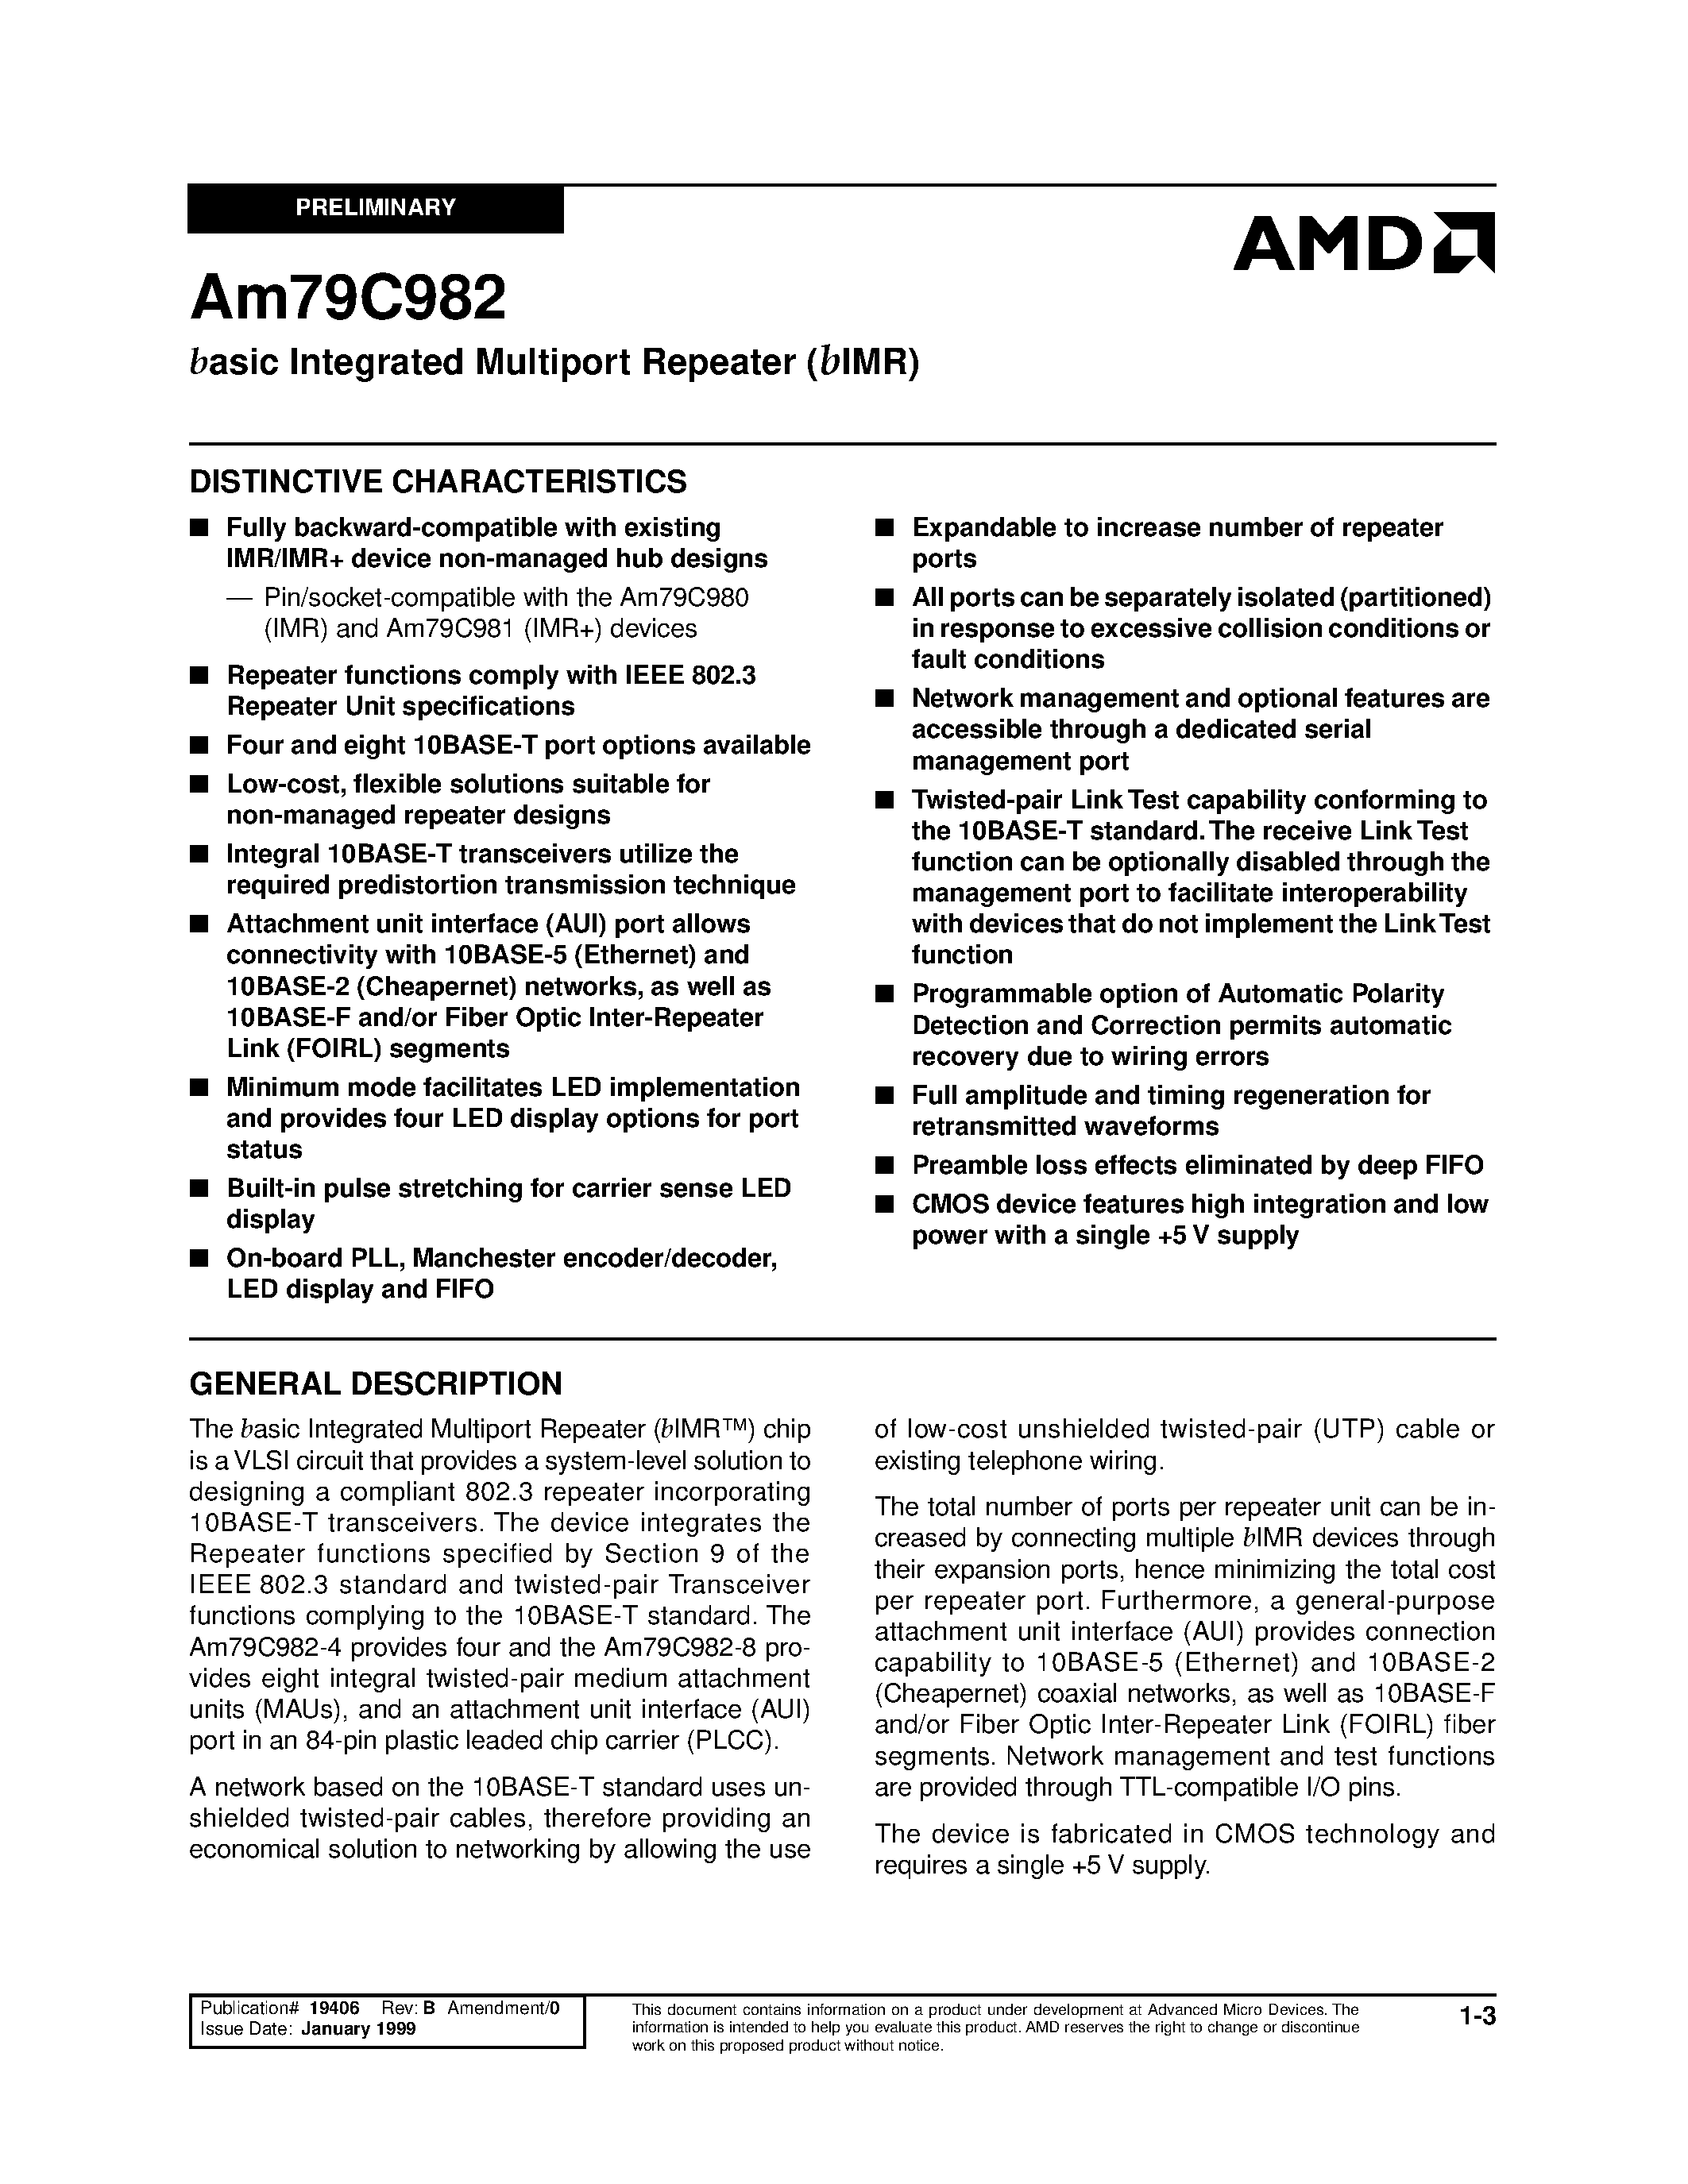 Datasheet Am79C982-4JC - basic Integrated Multiport Repeater (bIMR) page 1